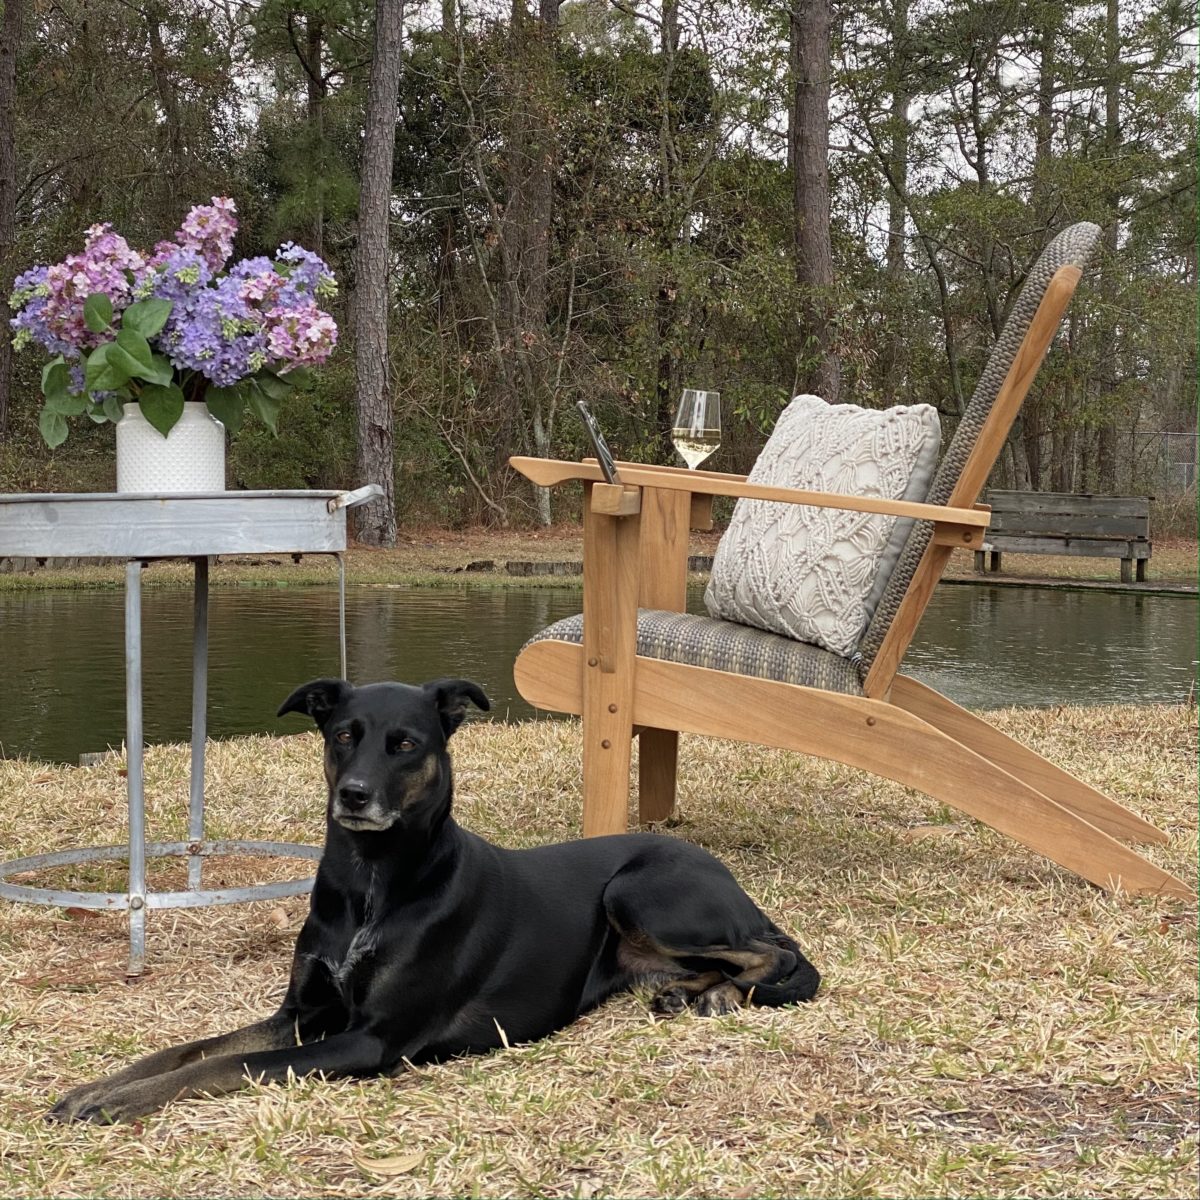 Teak Adirondack chair in front of the pond with a black dog in front of it and a table with purple flowers on it.